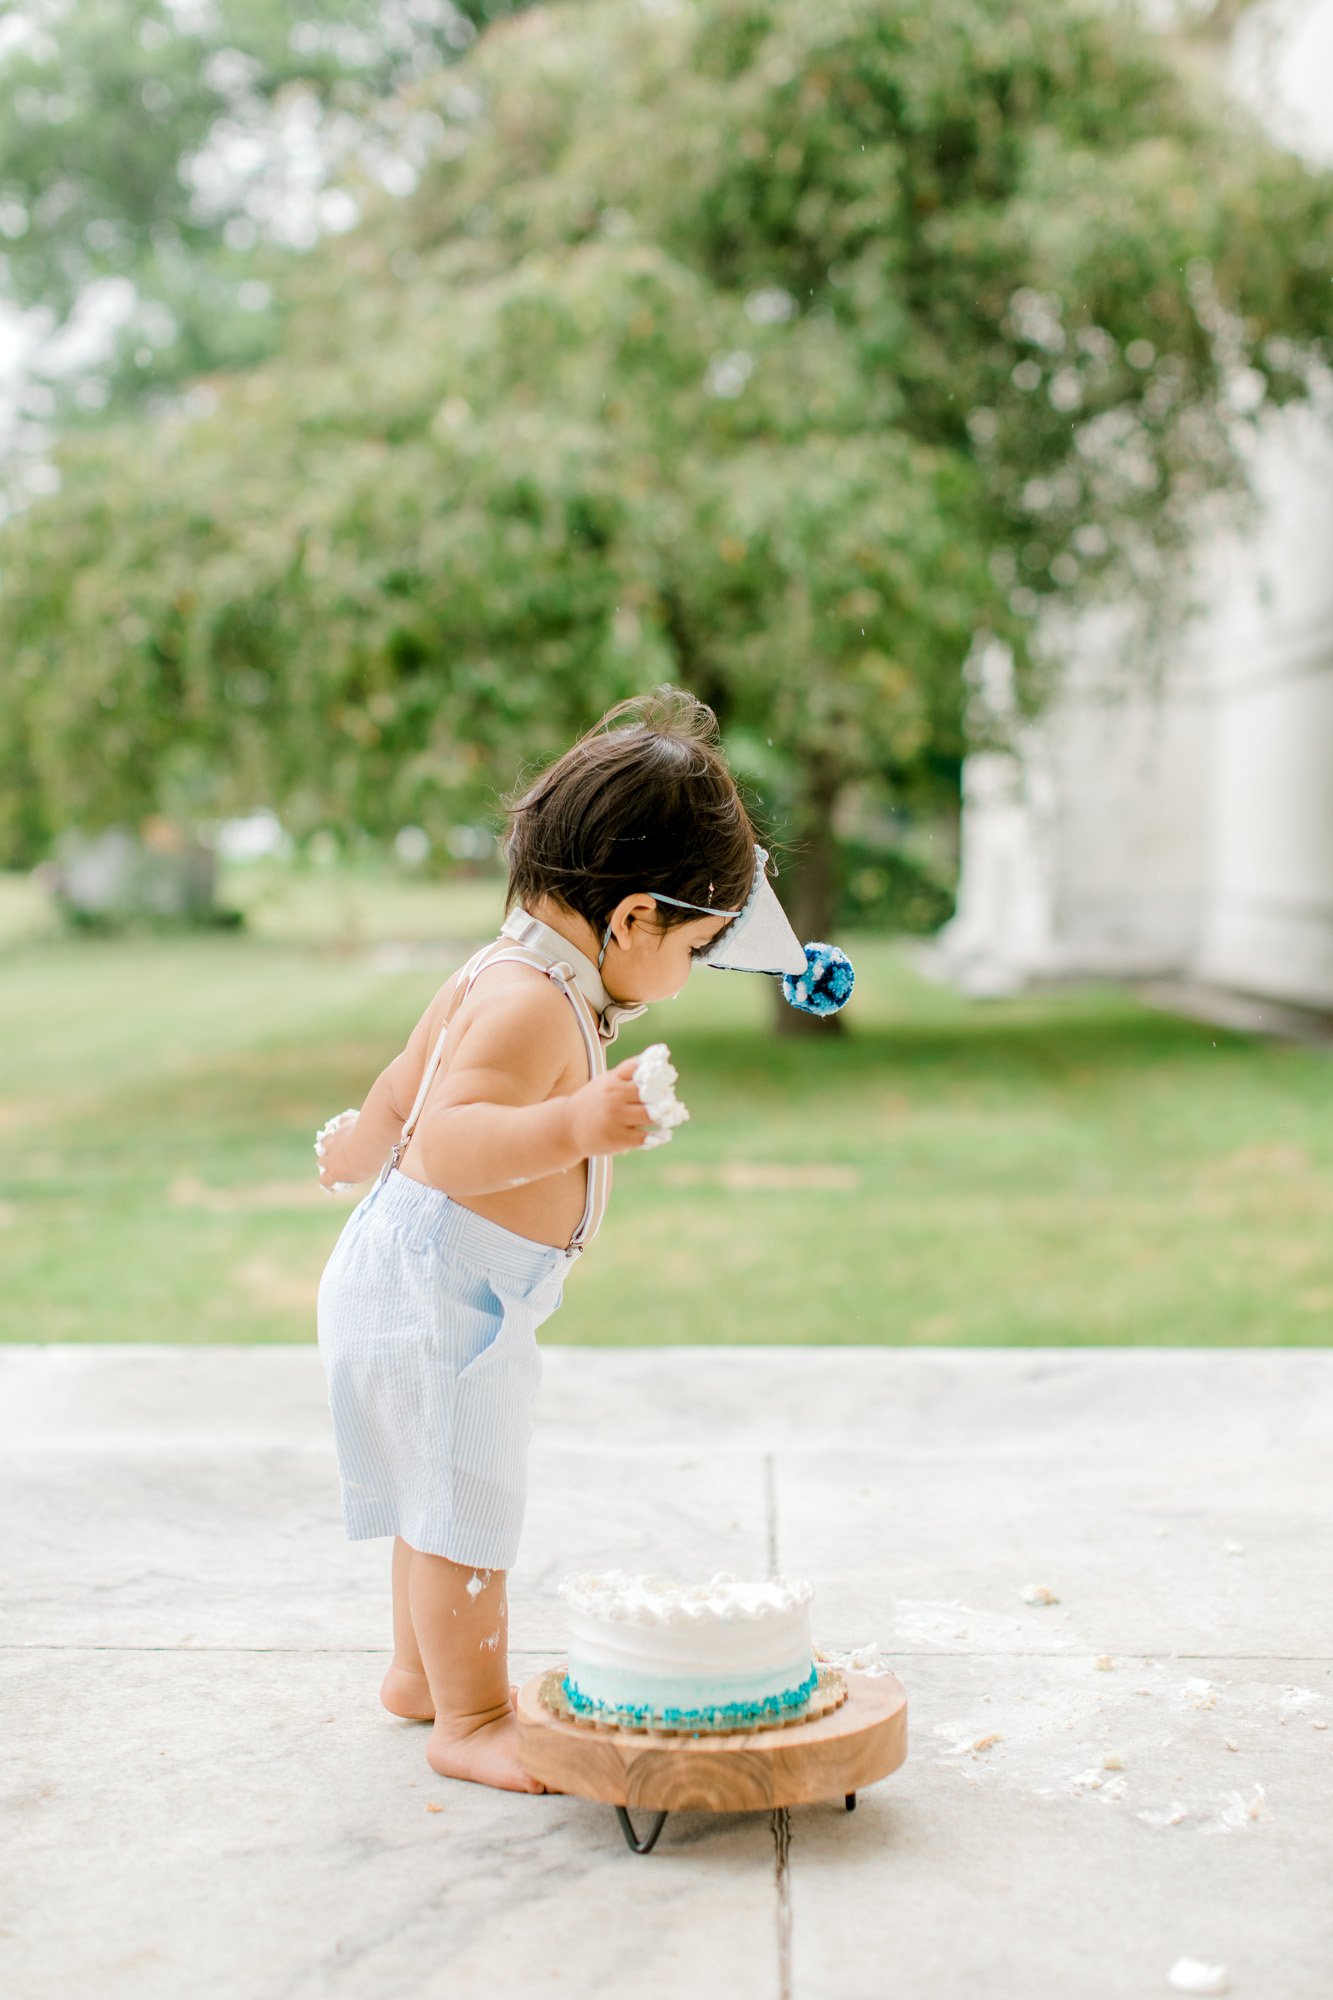 One Year Outdoor Cake Smash Birthday Session | West Michigan Family Photographer